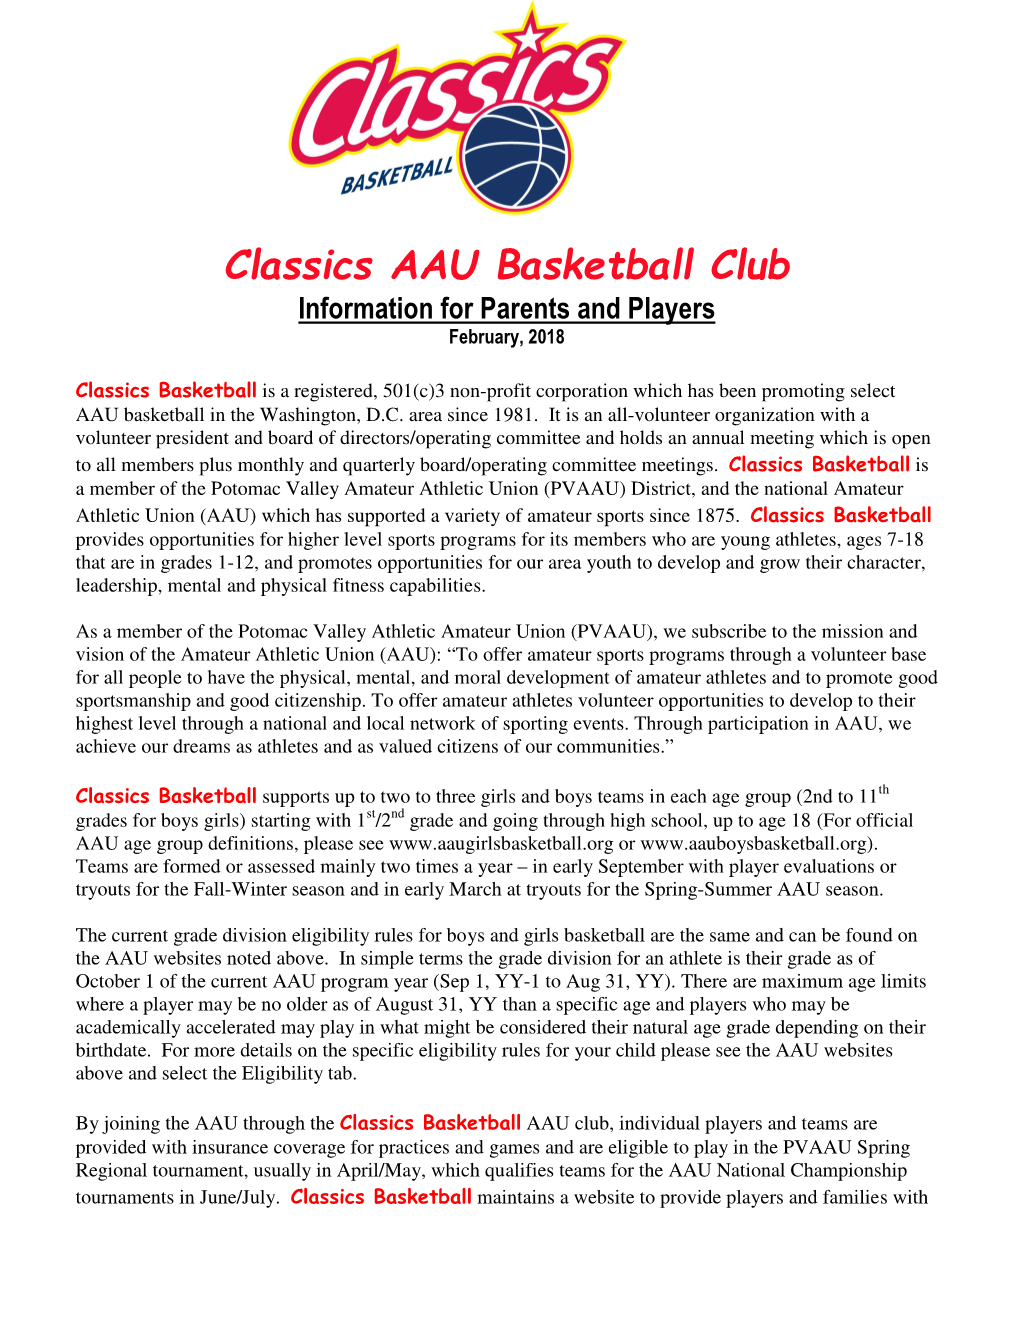 Classics AAU Basketball Club Information for Parents and Players February, 2018